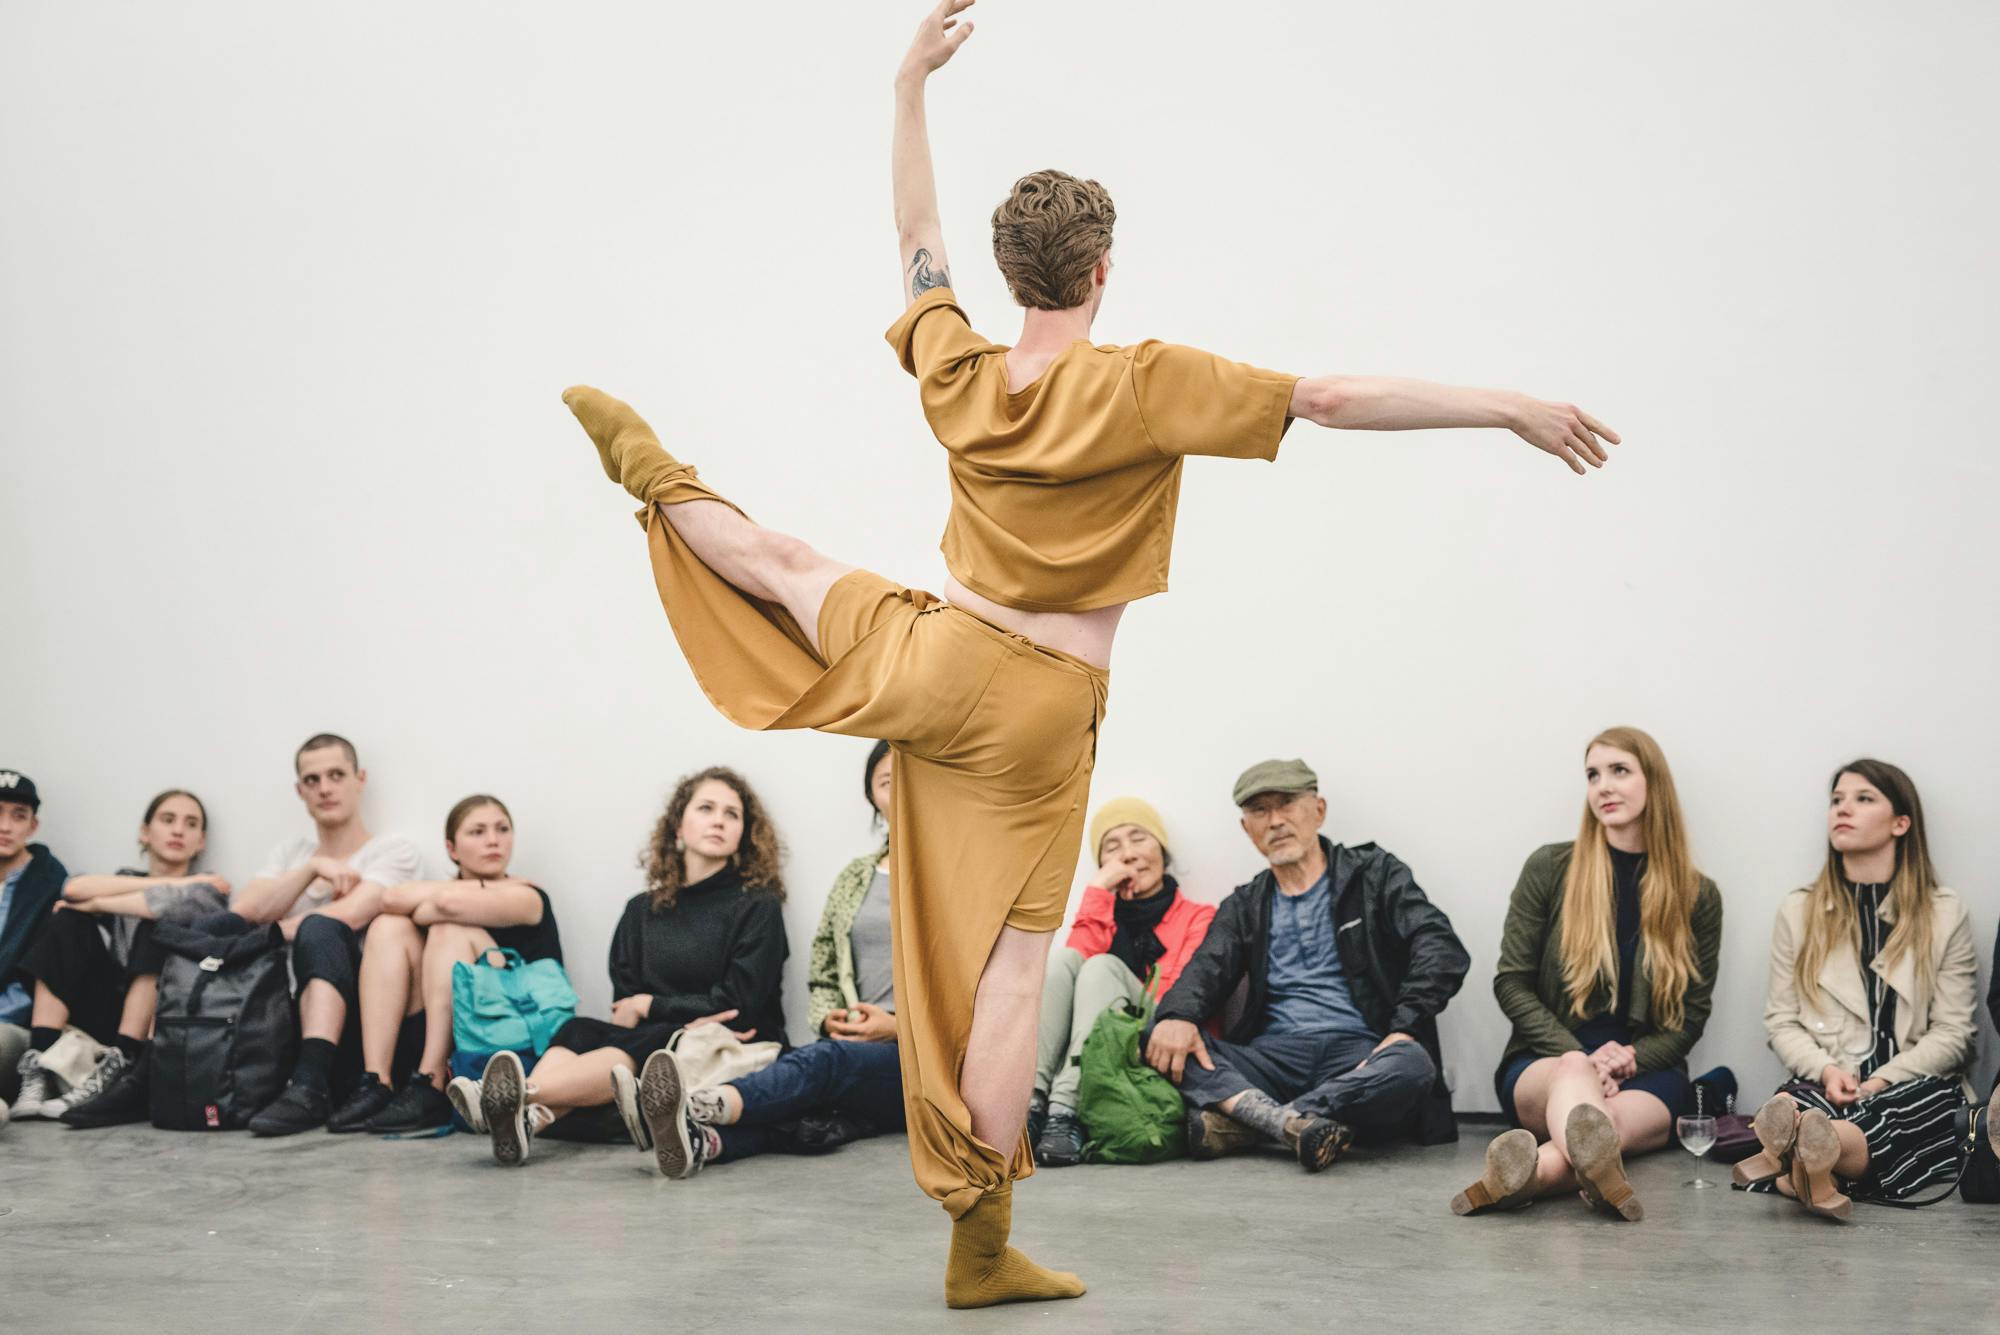 Andrew Bartee wearing a mastered-coloured outfit is posing for the audience in a gallery space. Audience sitting by the wall are looking at this artist’s ballet dancing.